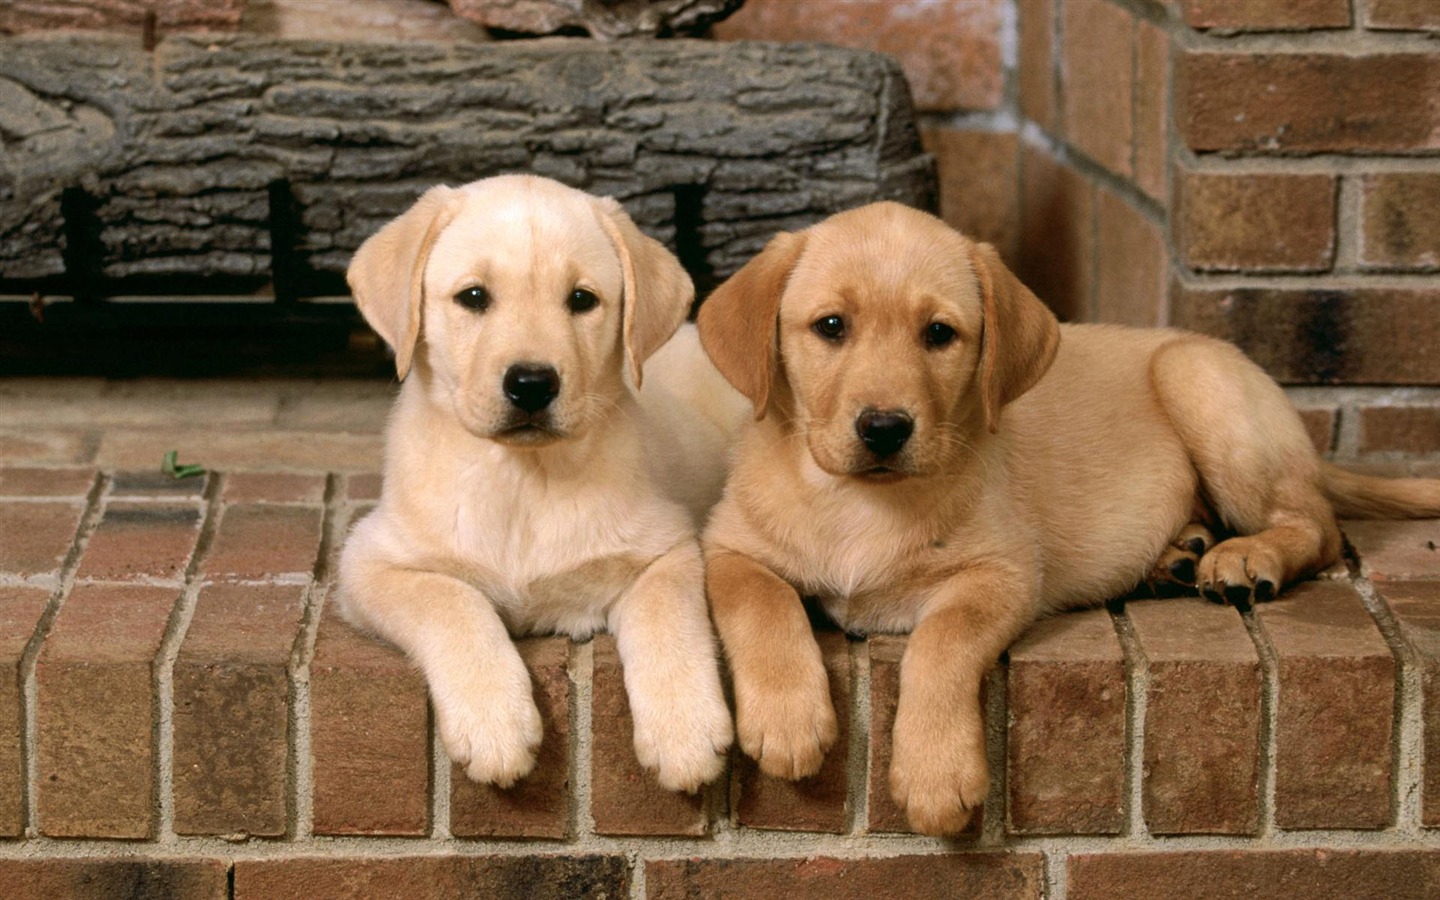 Puppy Photo HD wallpapers (2) #11 - 1440x900